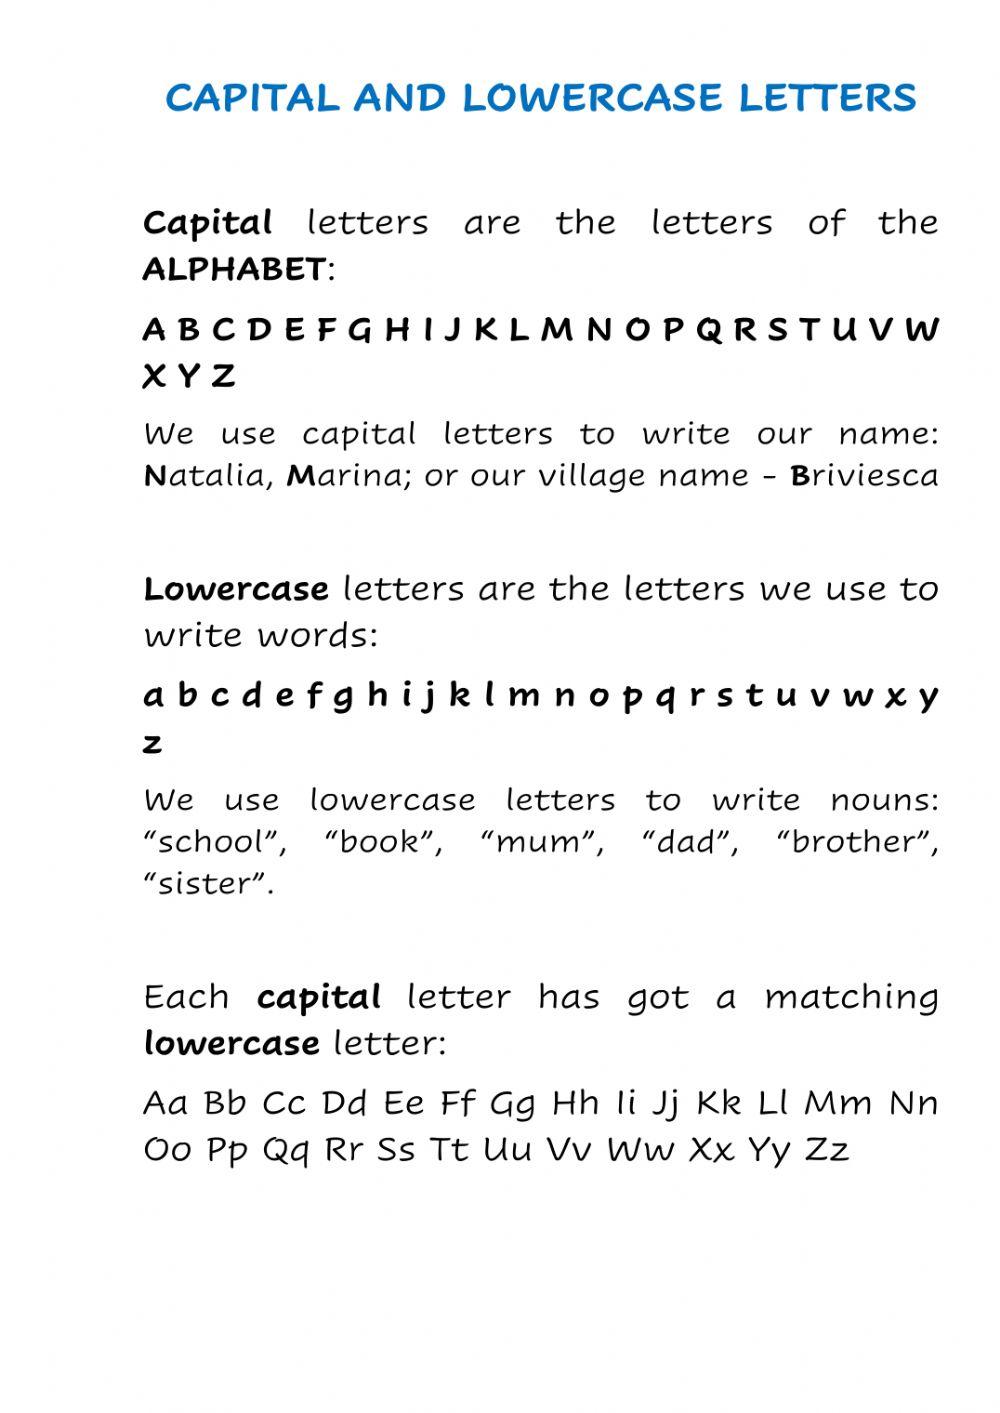 Matching letters 3